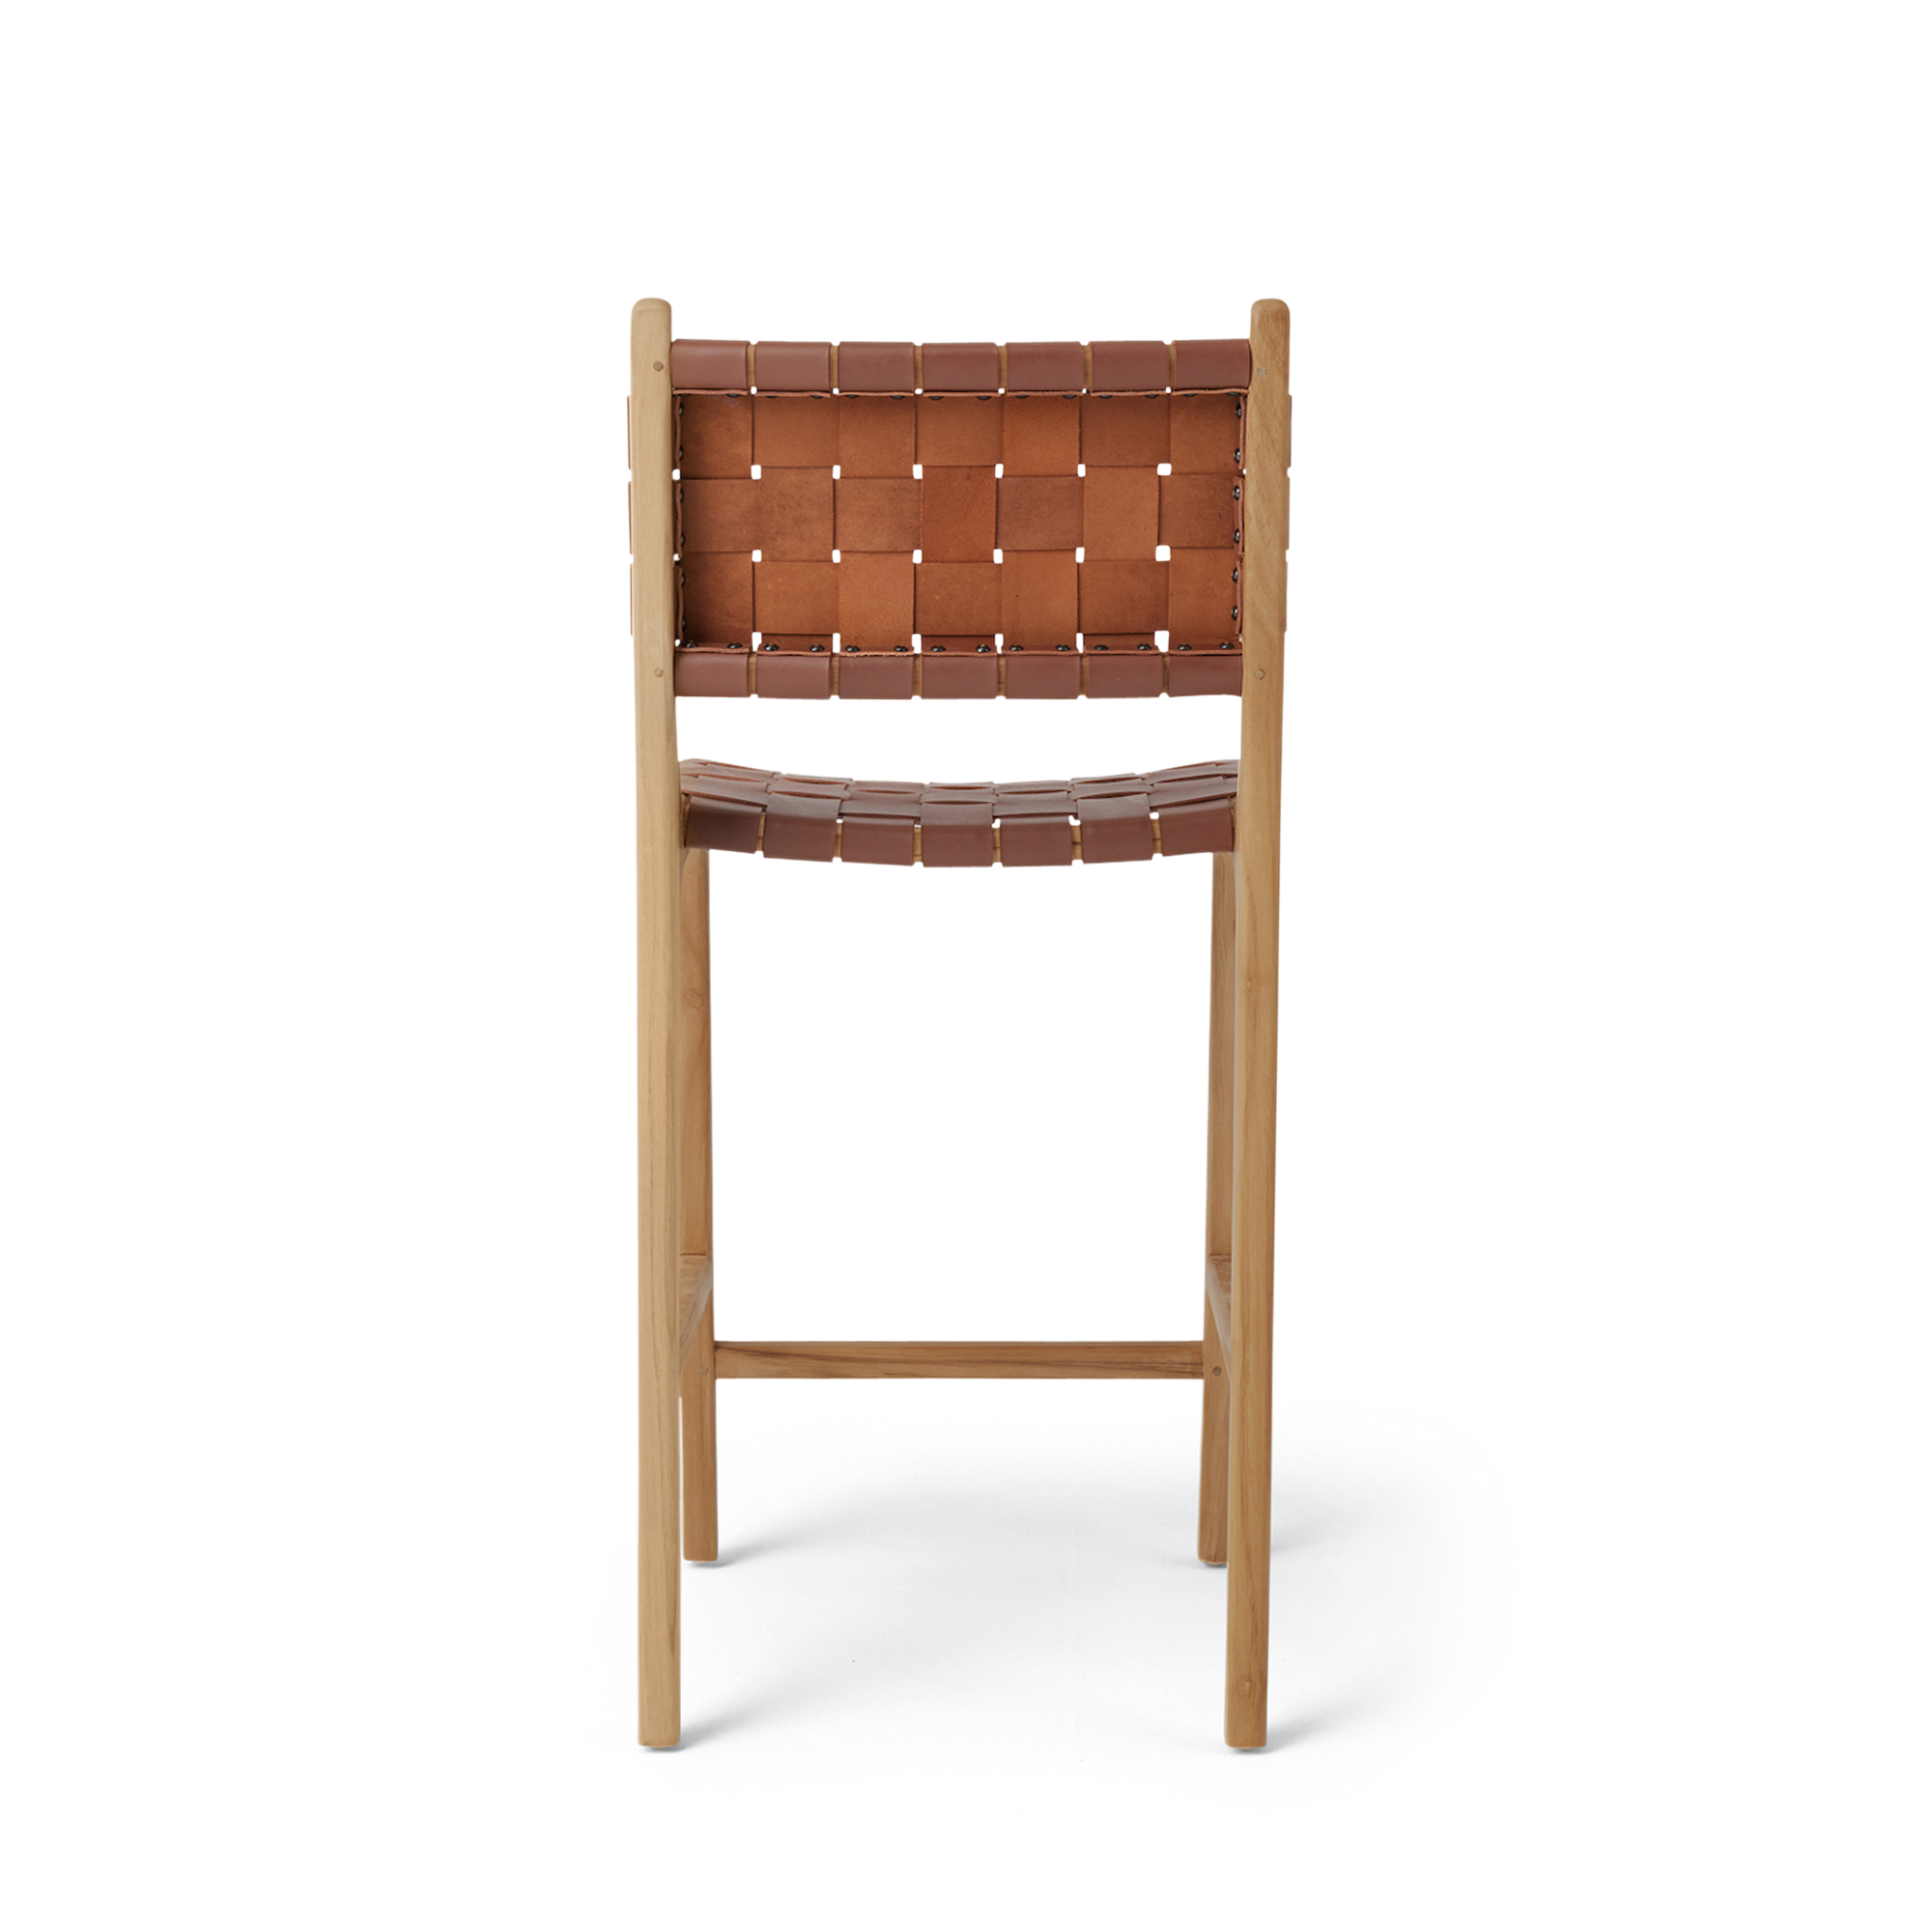 open box - stool #2 in whiskey